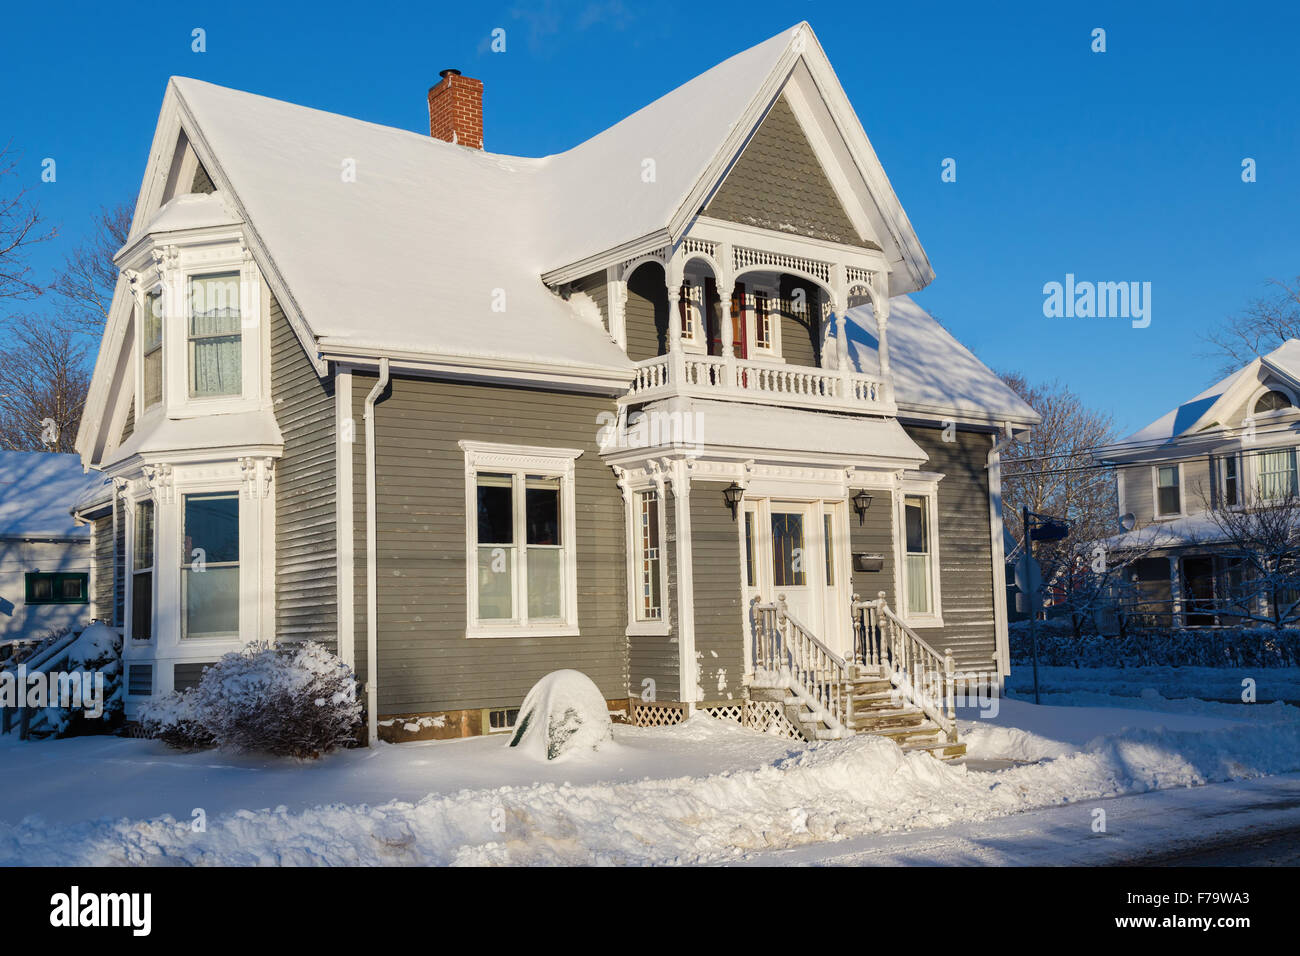 An older style North American home after a snowfall. Stock Photo